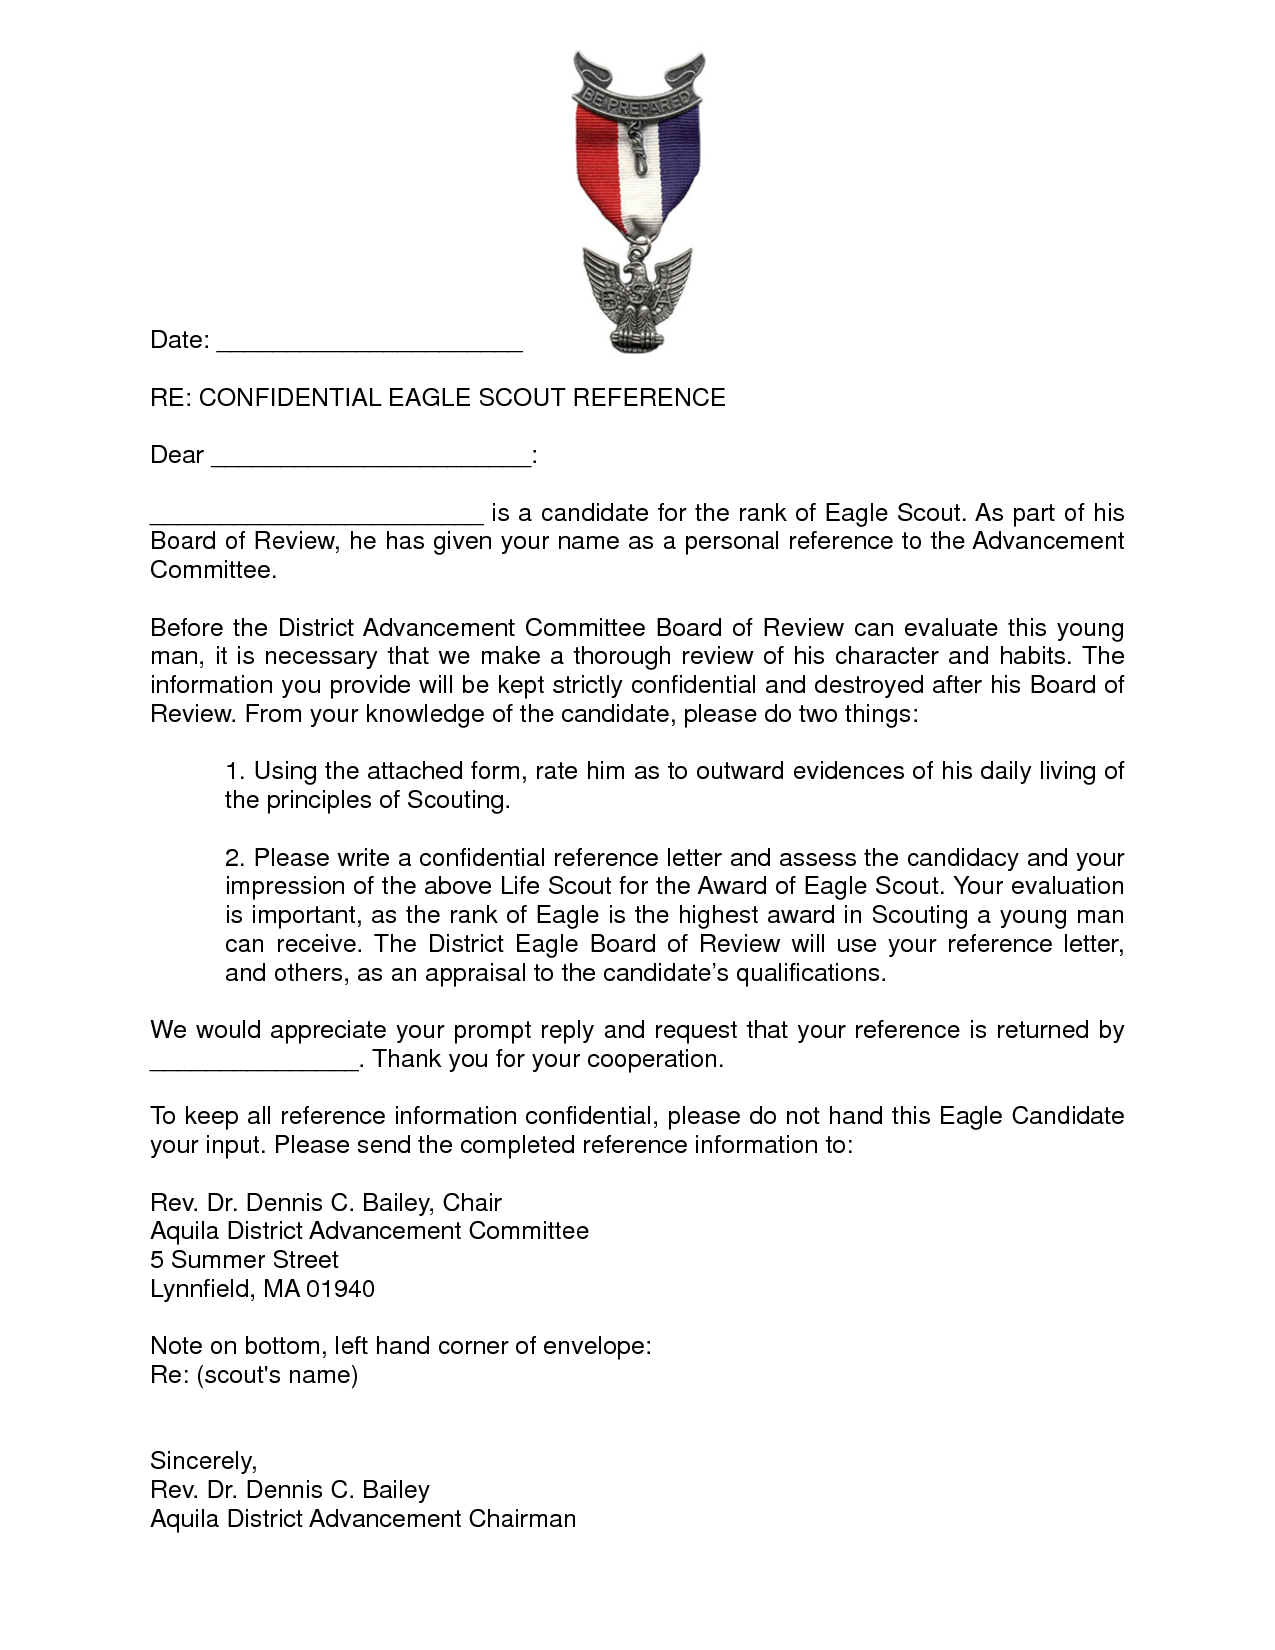 Eagle Recommendation Letter Template Examples | Letter ...